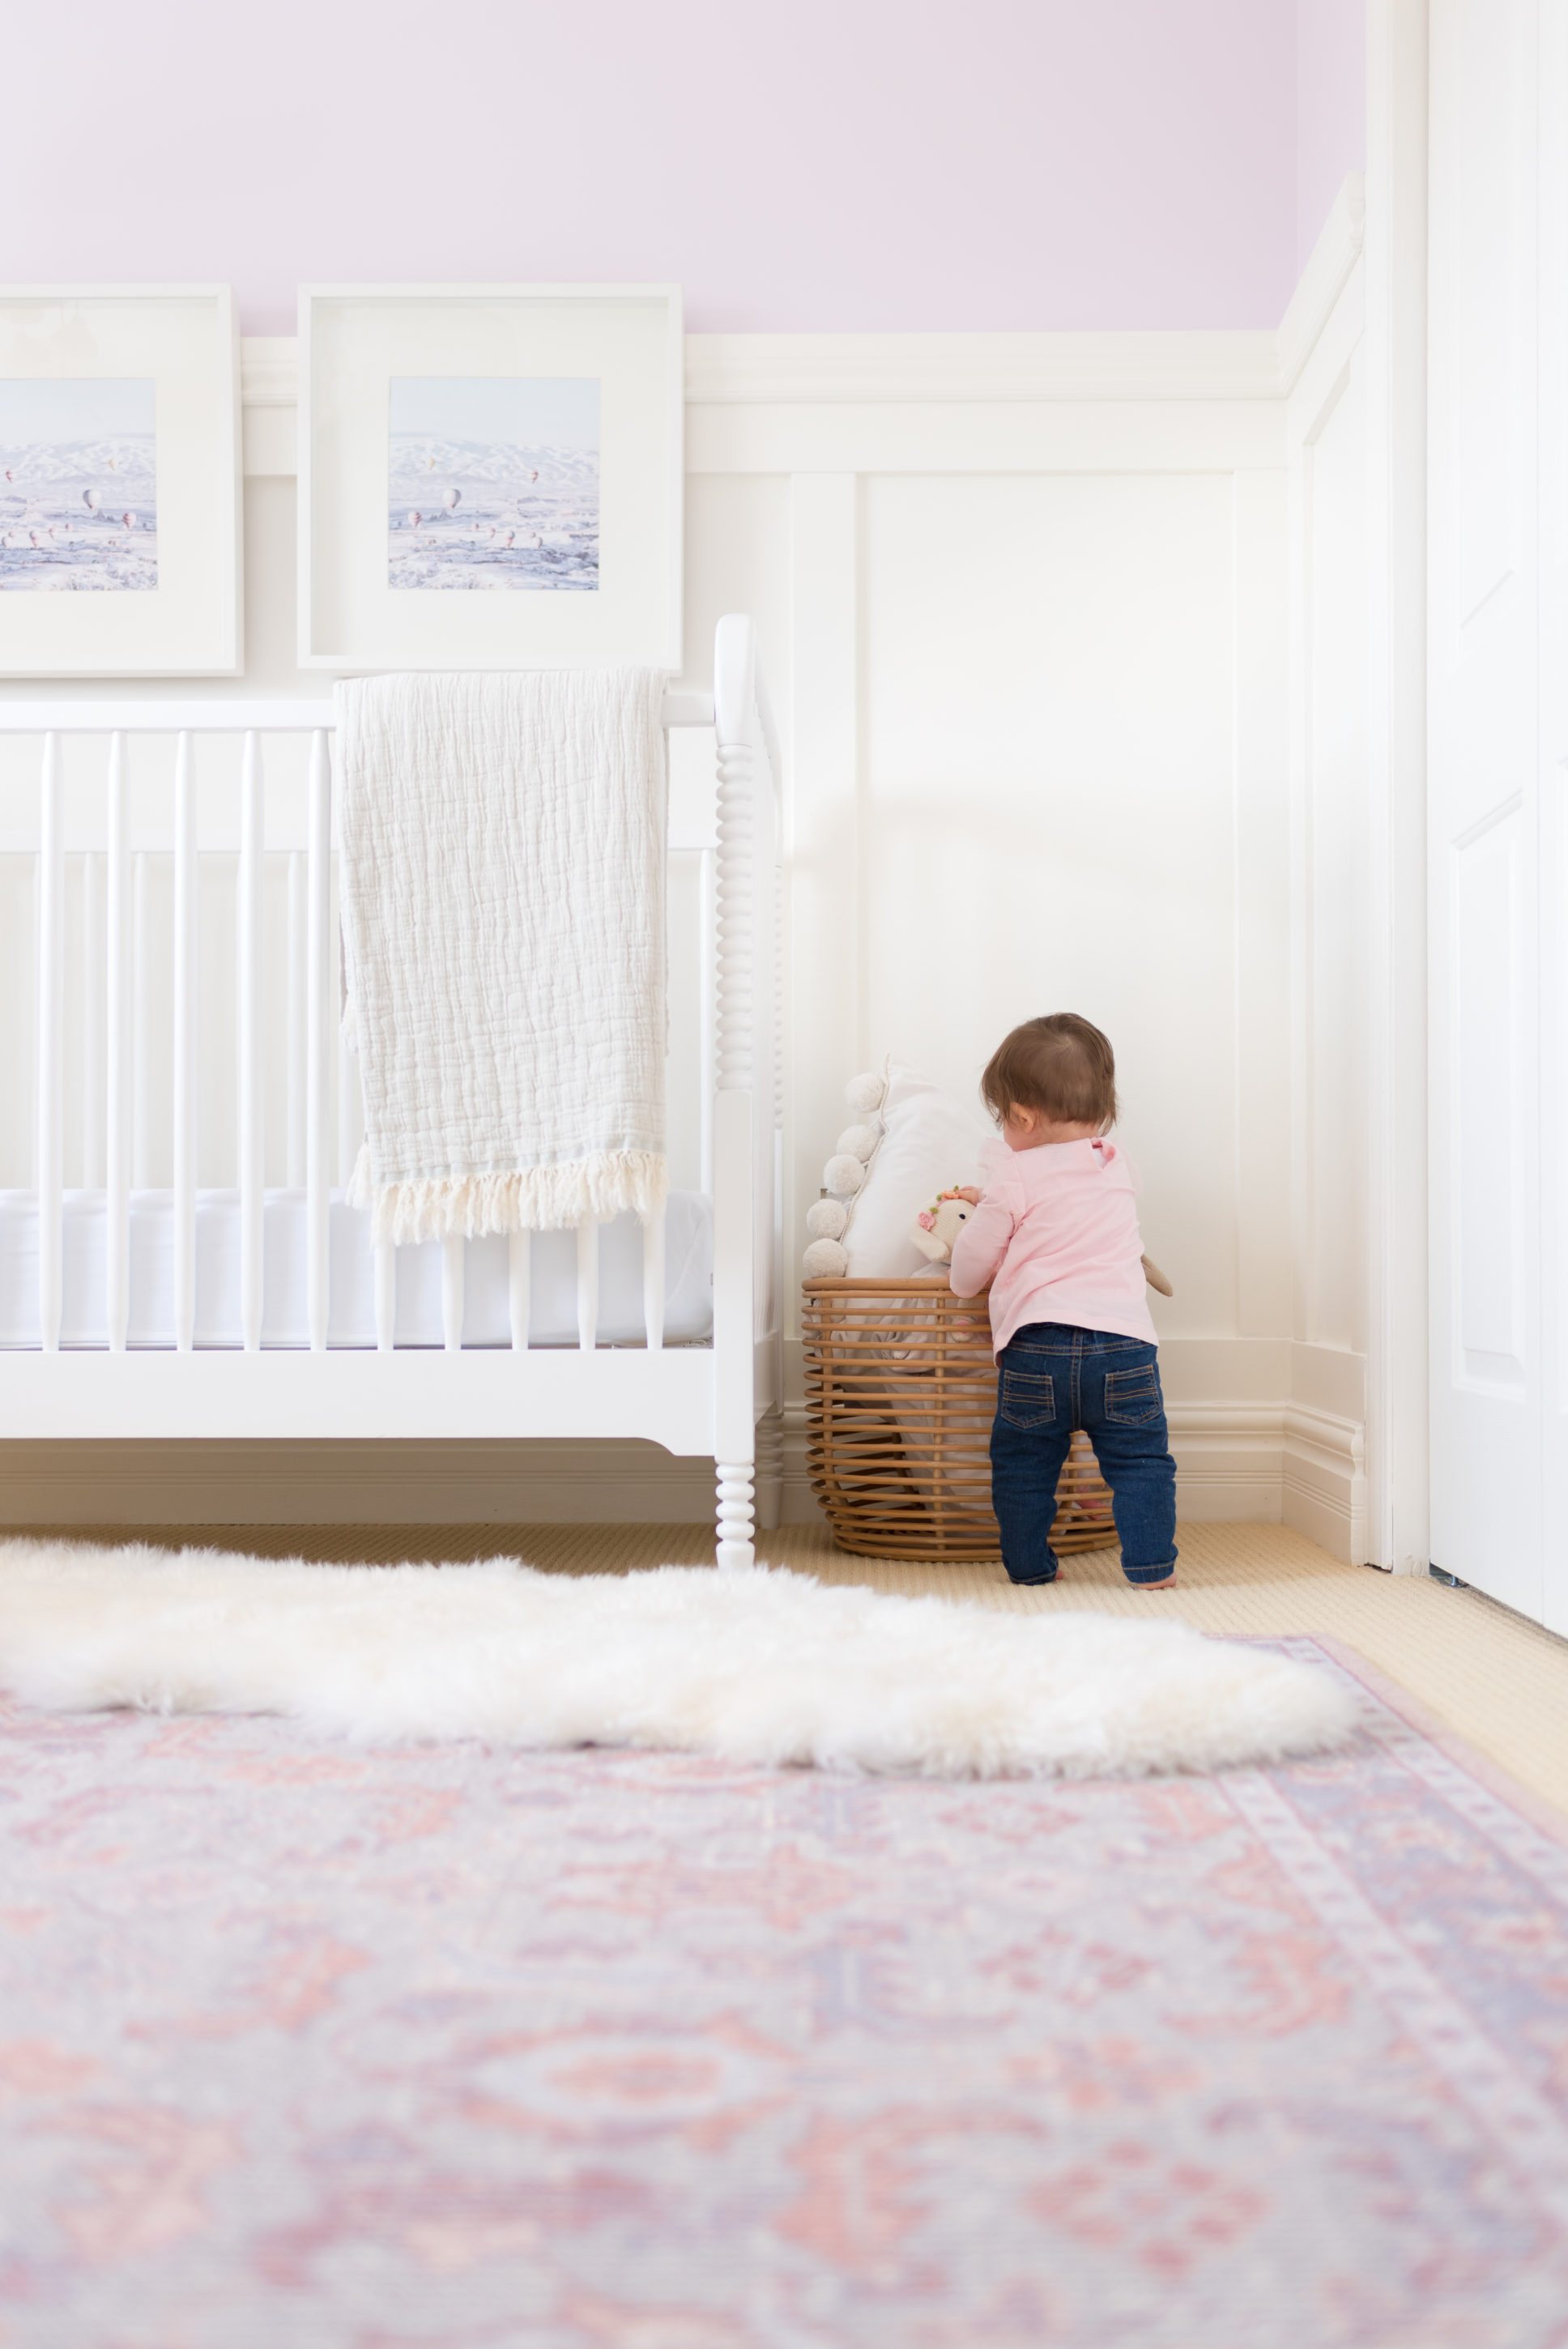 How To Choose The Best Rug For A Nursery Or Child S Bedroom